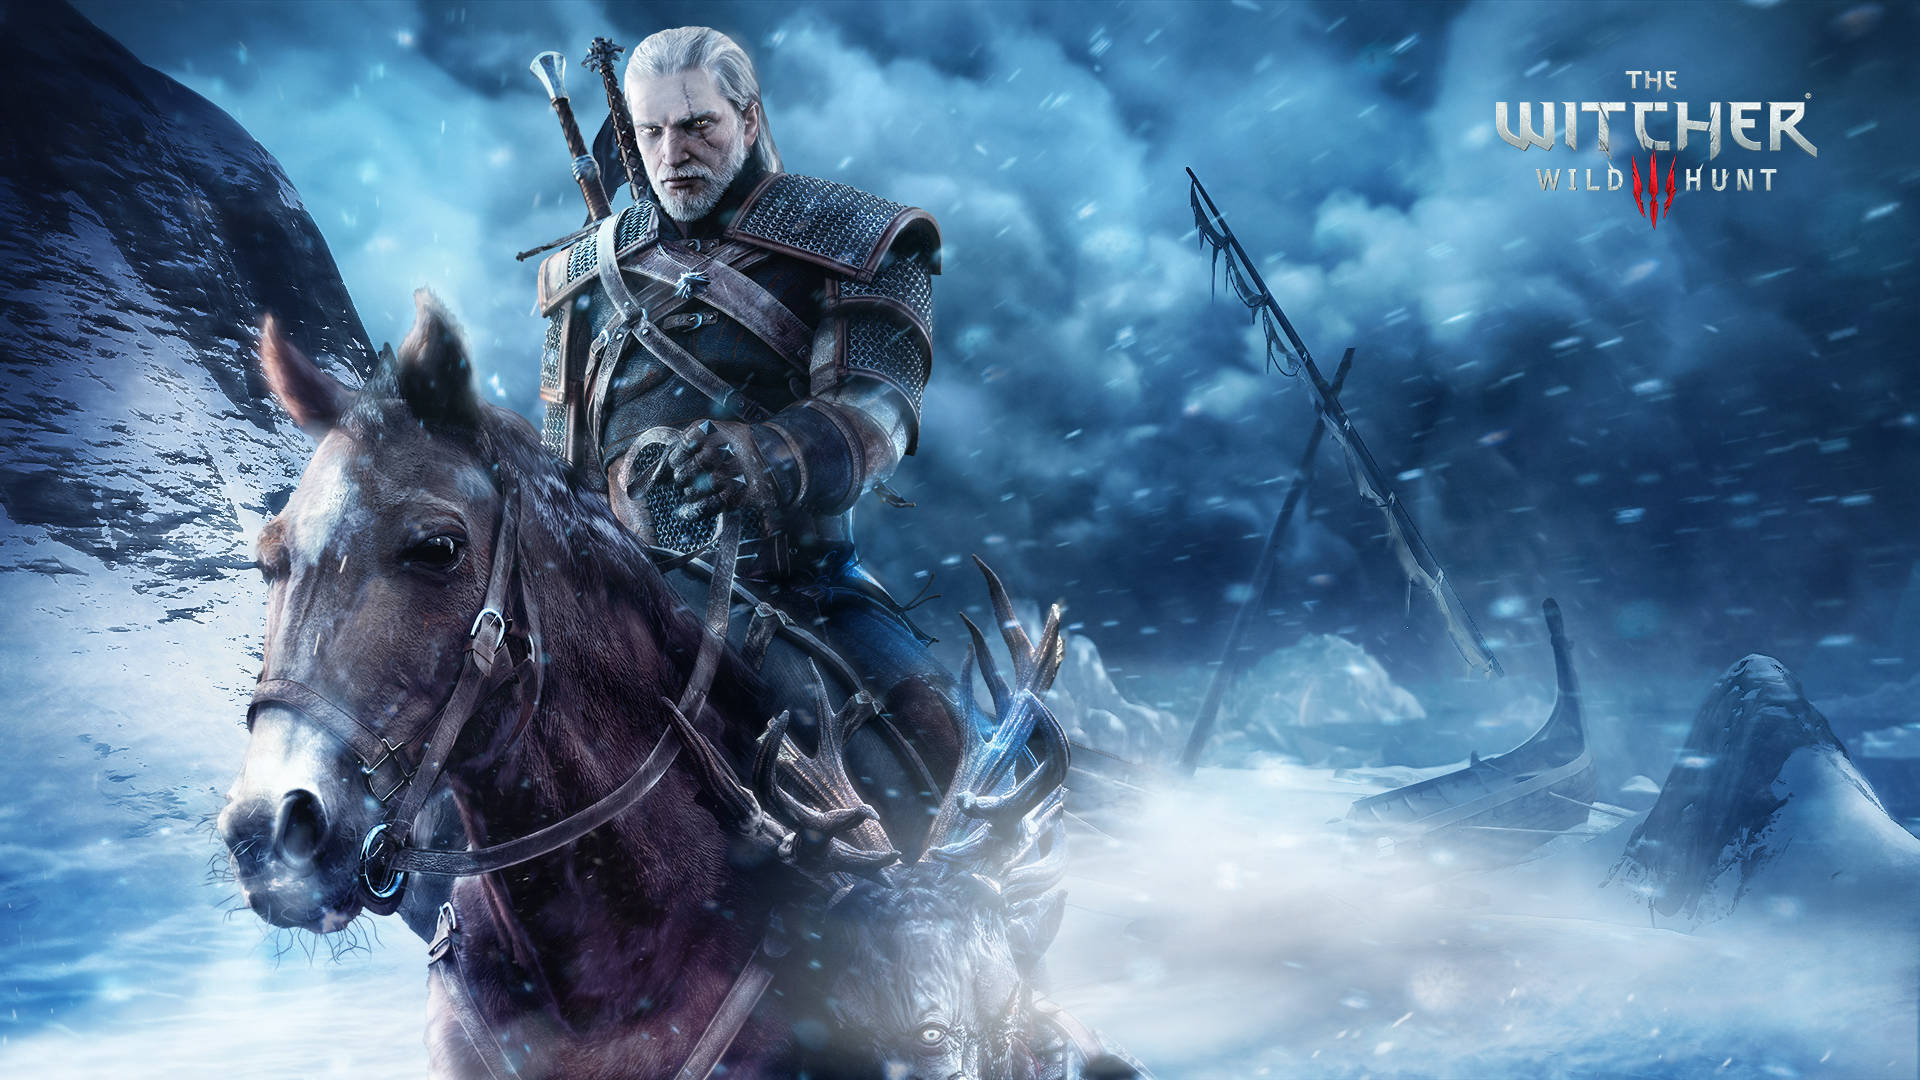 Geralt of Rivia Challenges the Snow on his Noble Steed in The Witcher 3 Wallpaper